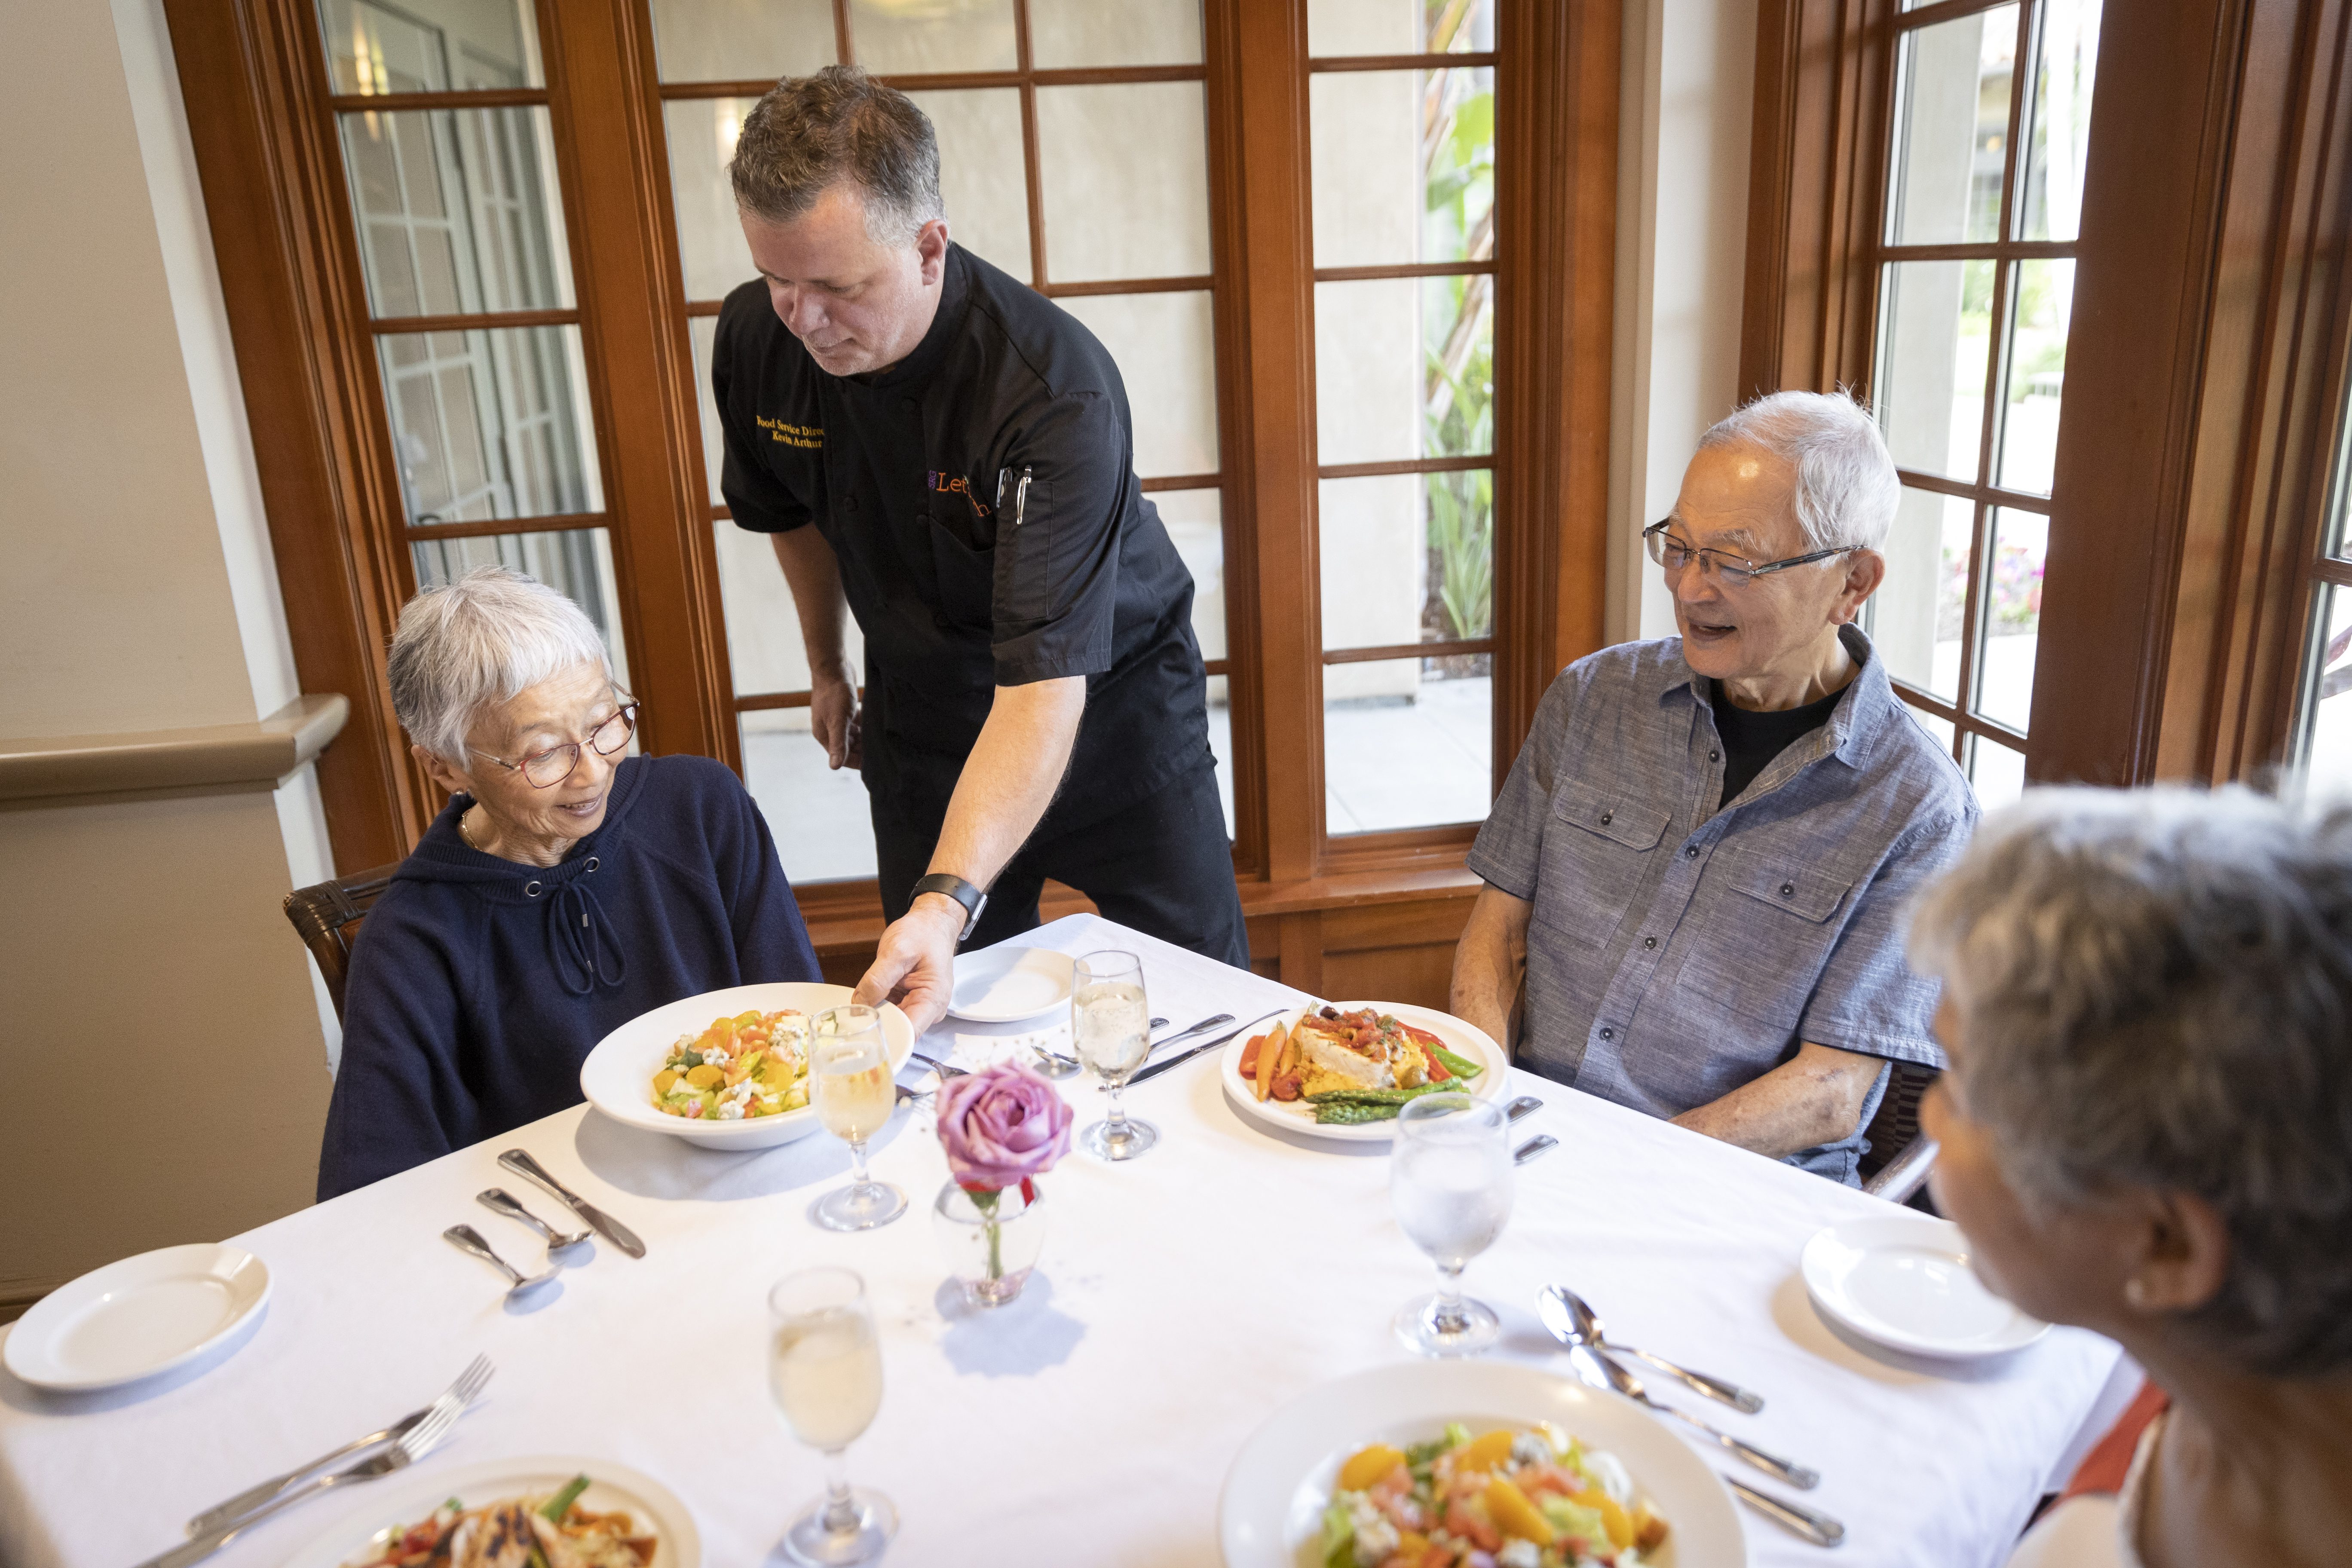 An elderly couple enjoying a meal at a table, with a waiter serving them delicious food.